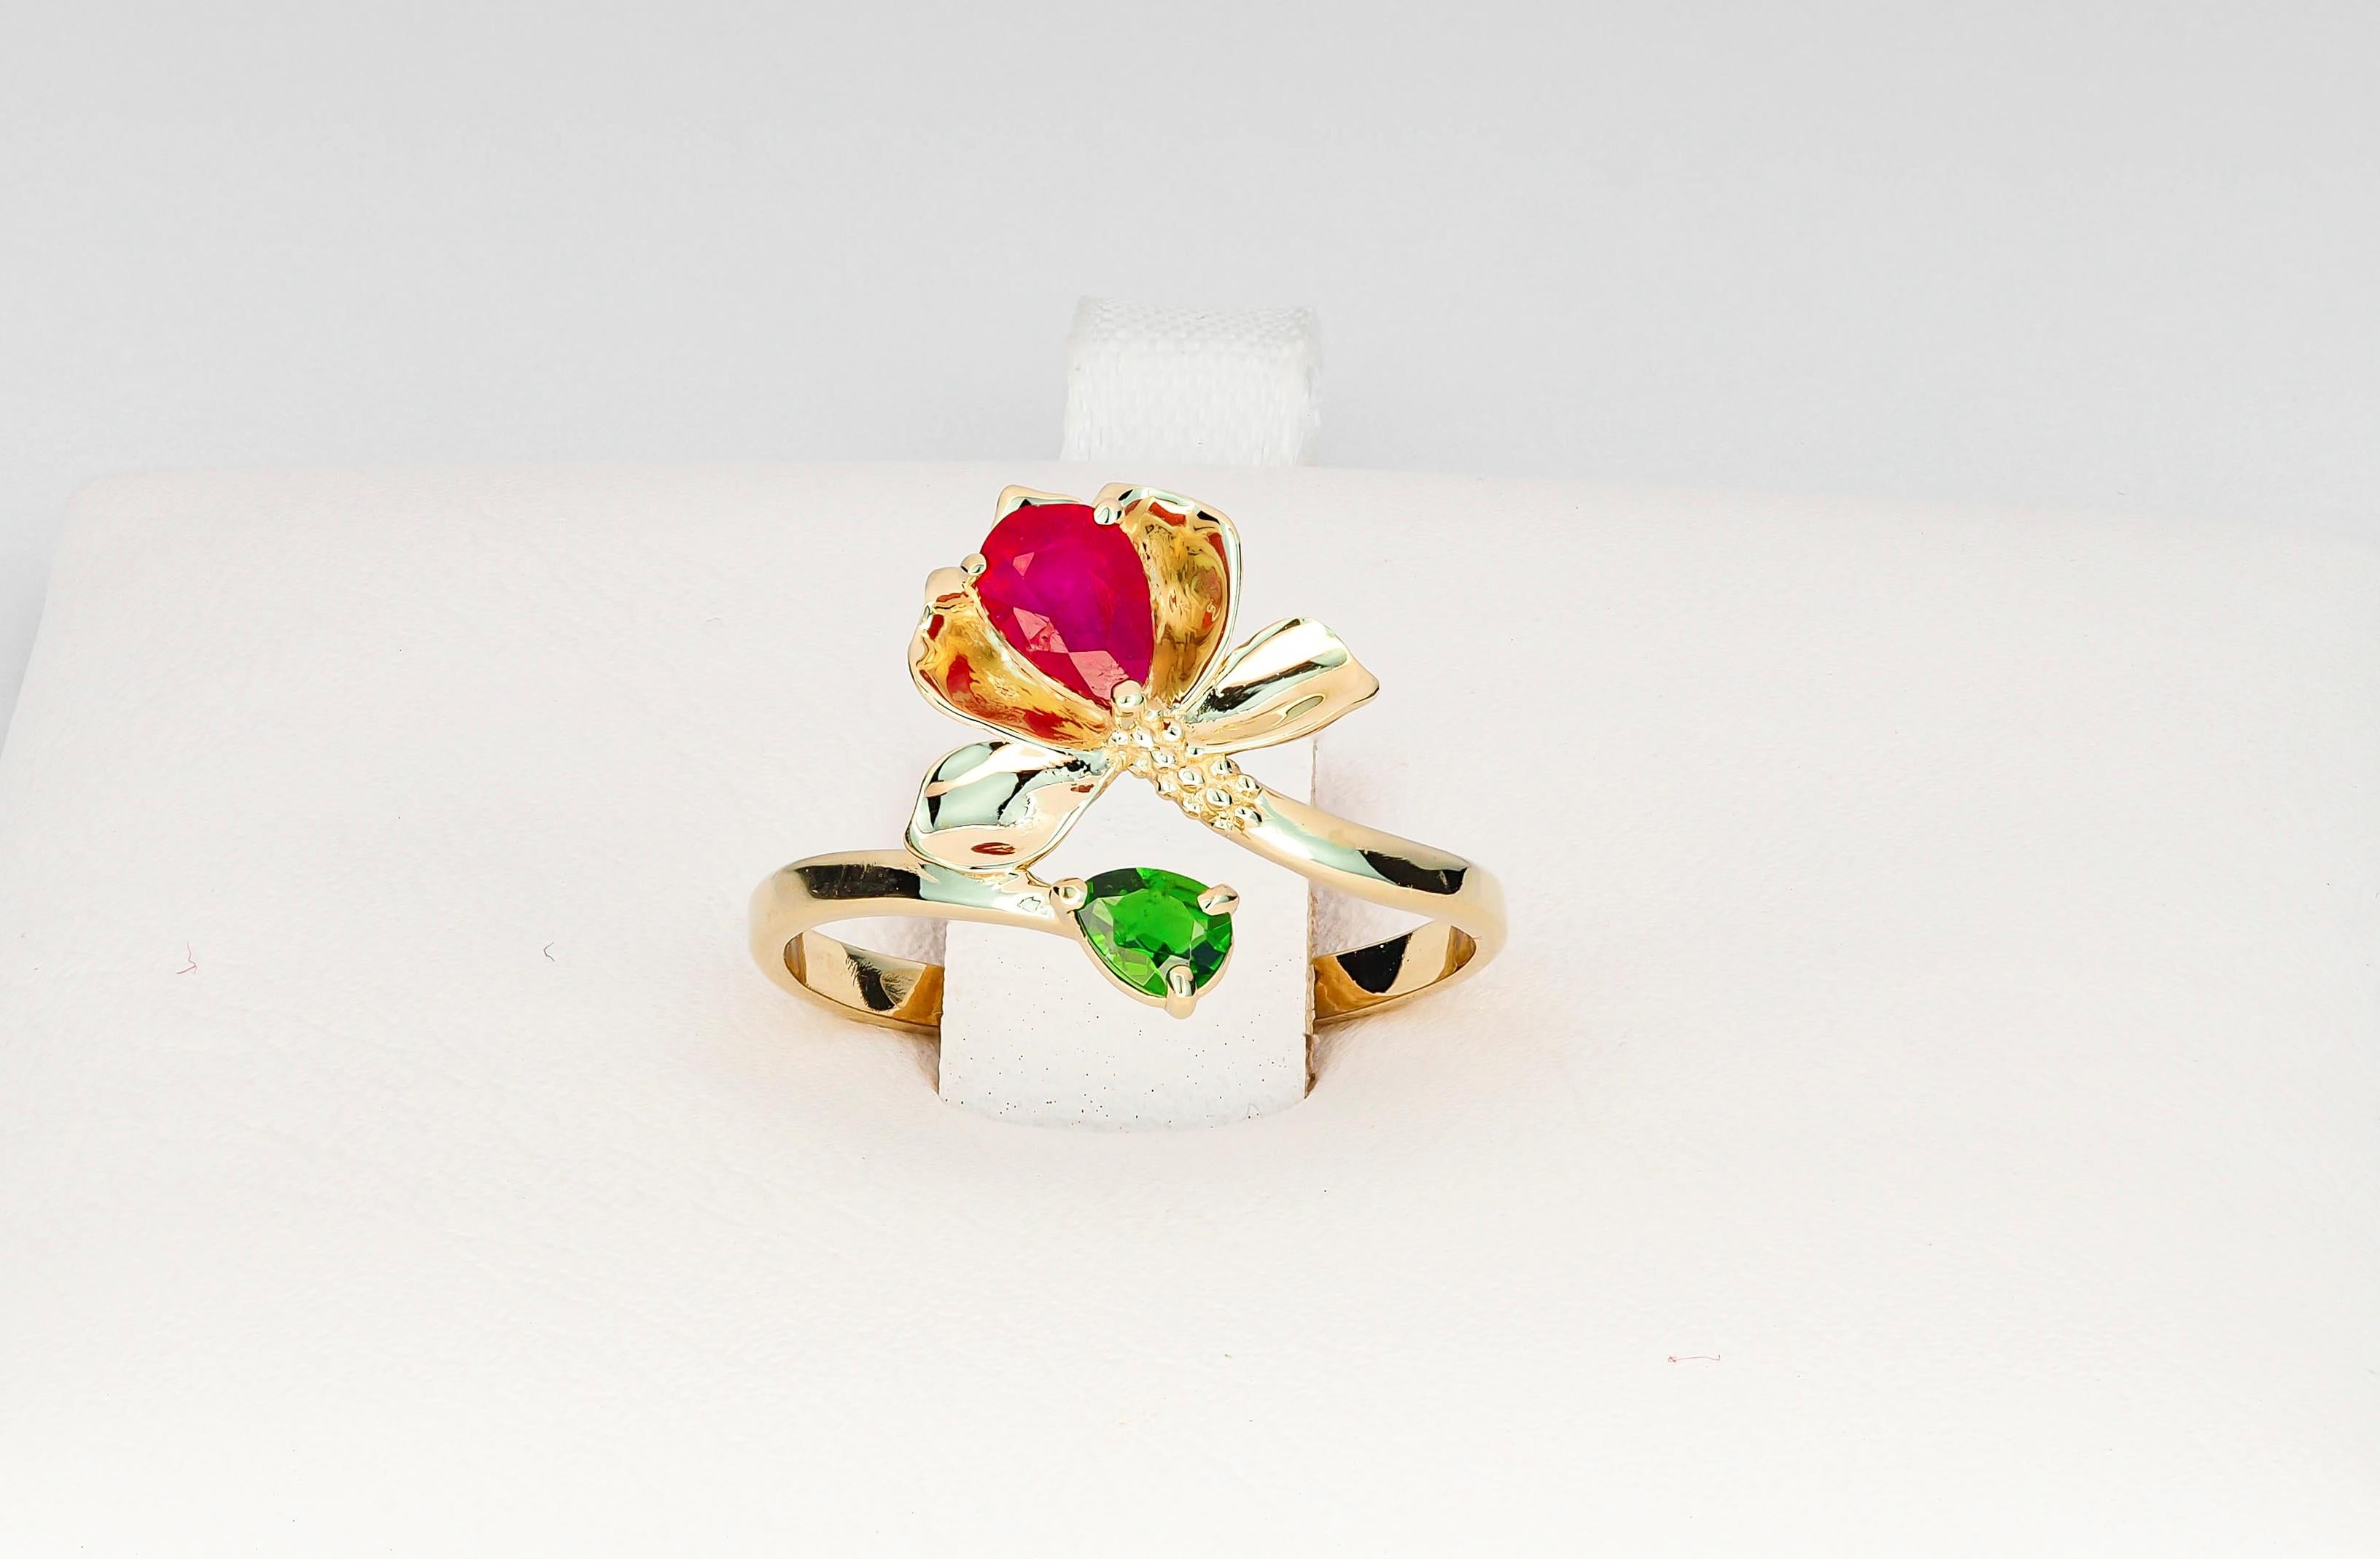 For Sale:  14 K Gold Ring with Ruby and Chrome Diopside. Water Lily Flower Gold Ring! 4